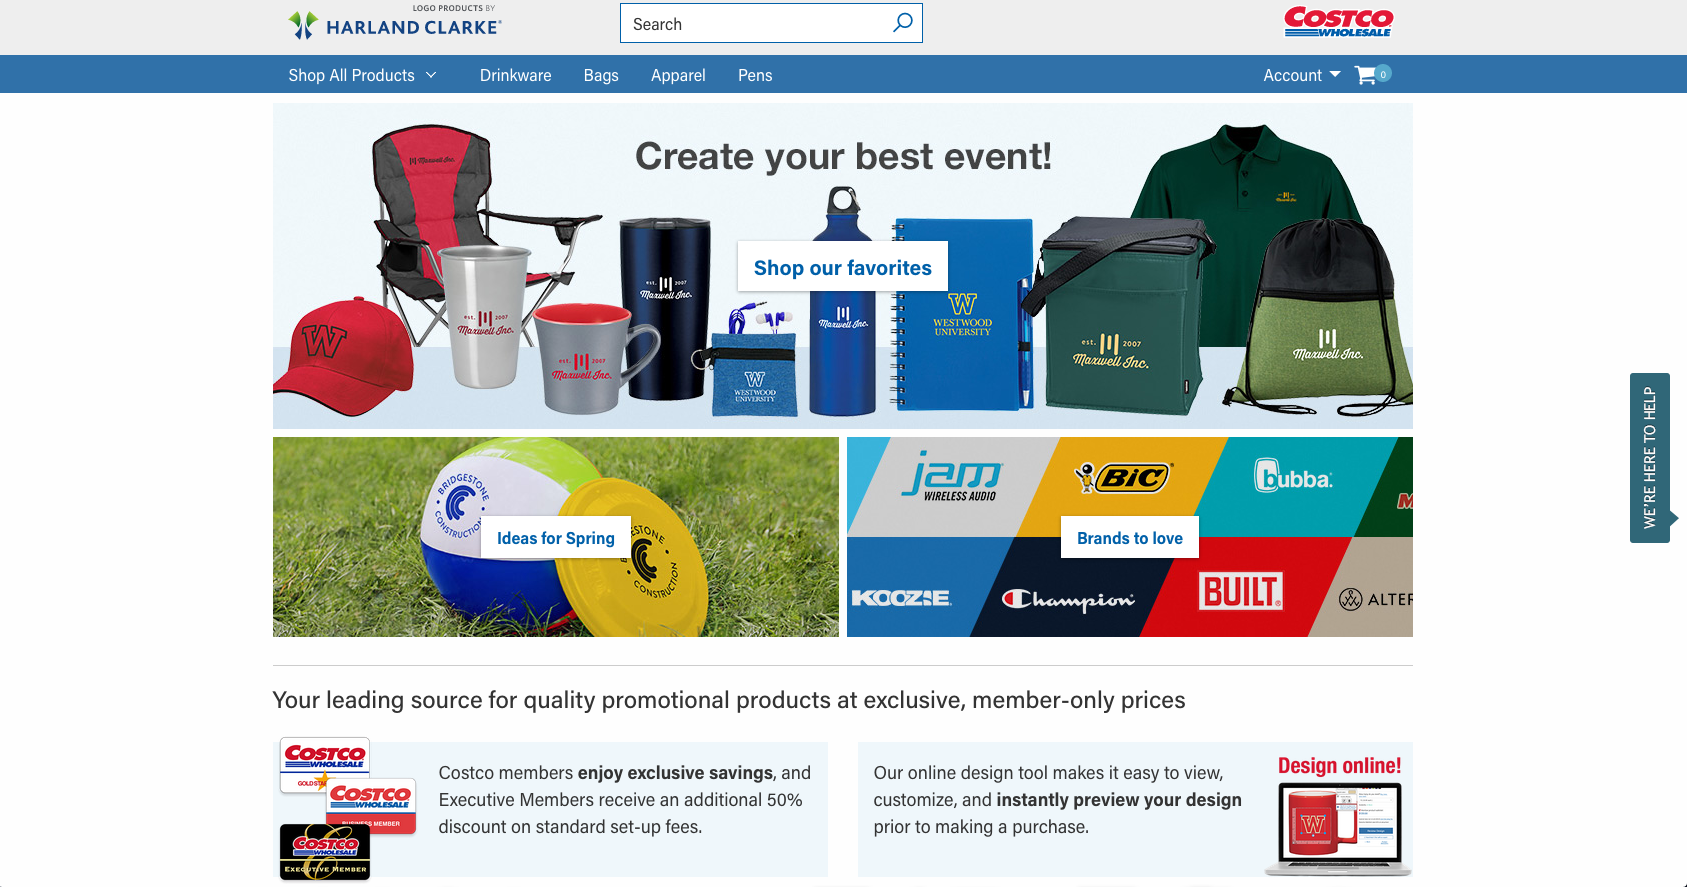 New Costco Promotional Products Business Launches Via Harland ...